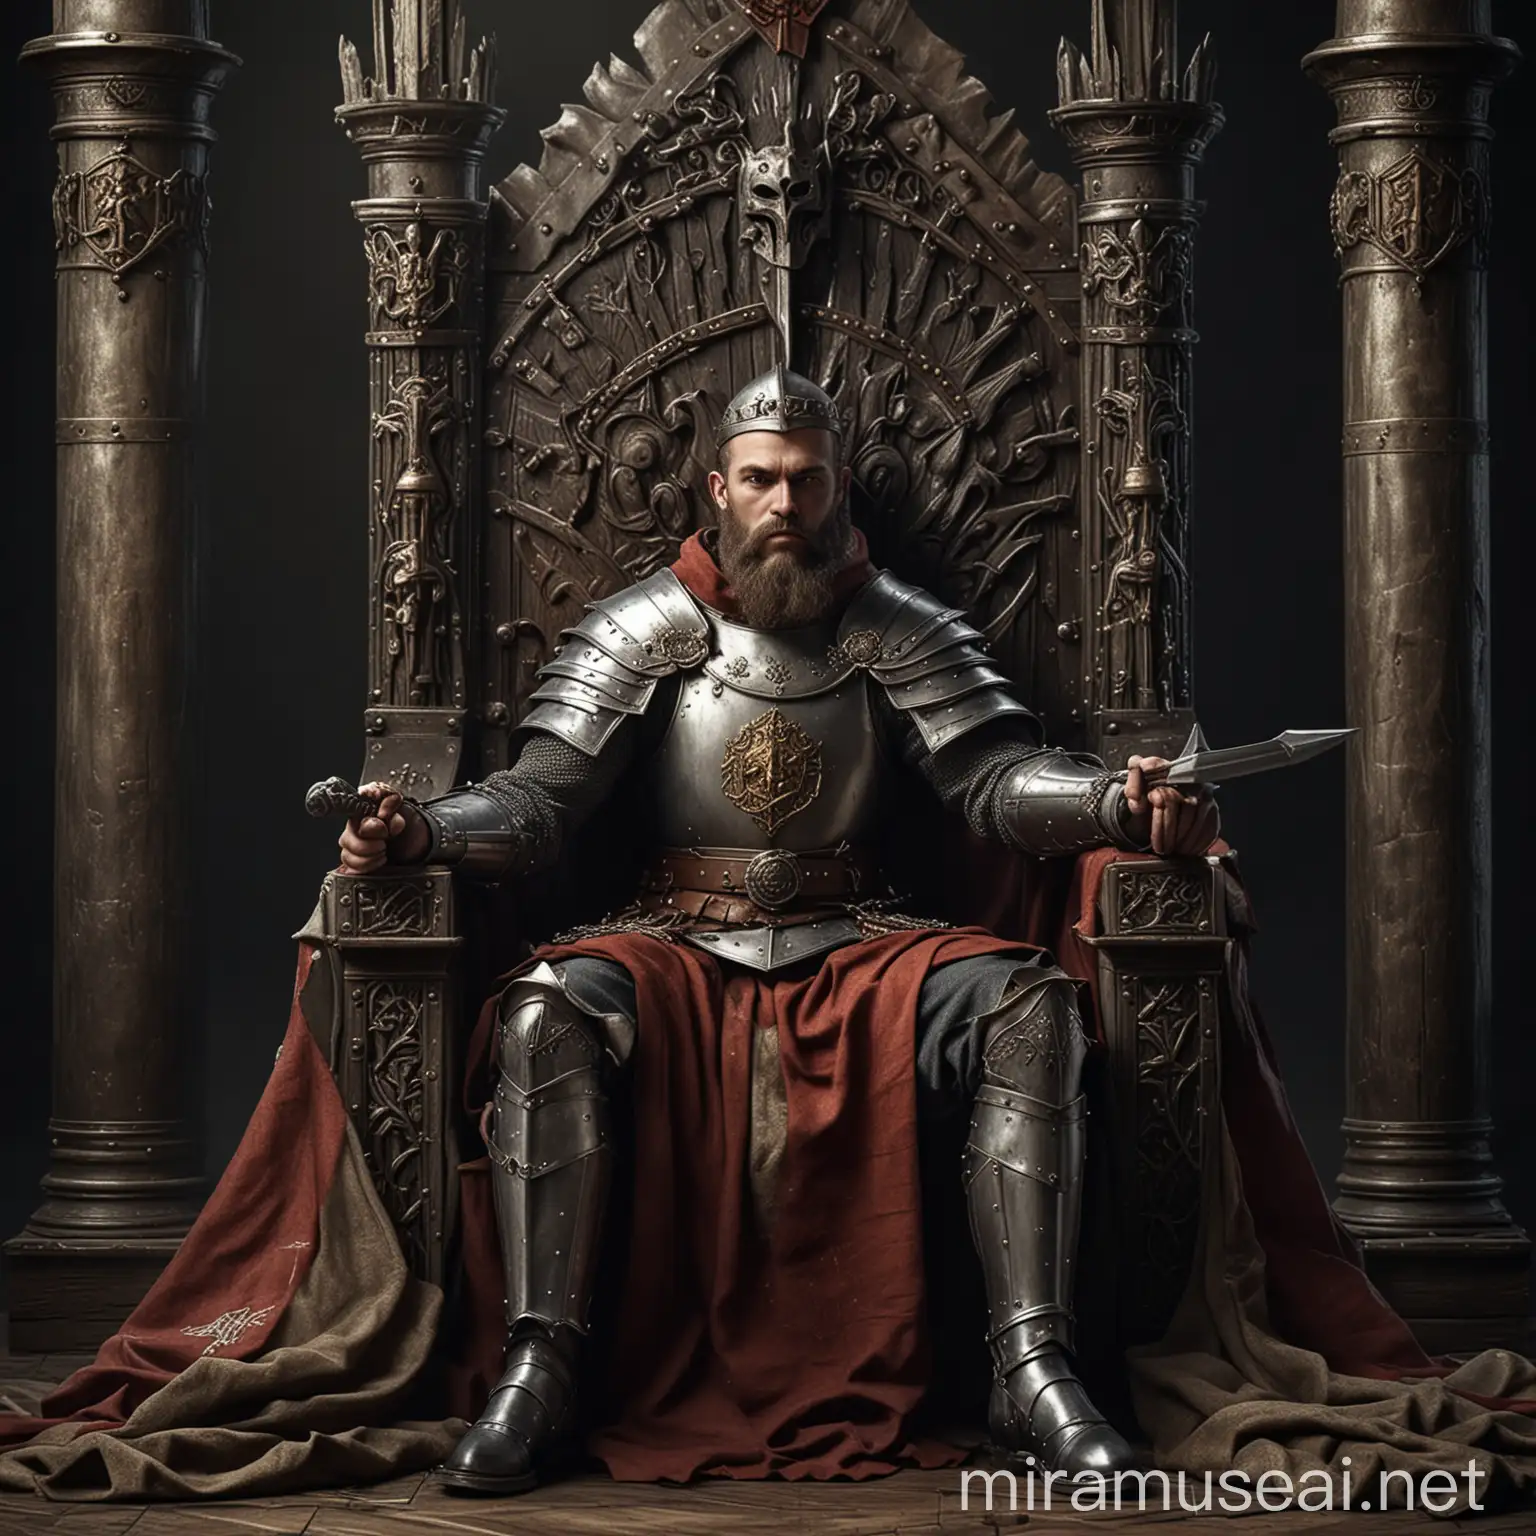 dangerous knight sitting on a throne, medieval, 4k, realistic, 1940s style, epic detailed photograph shot